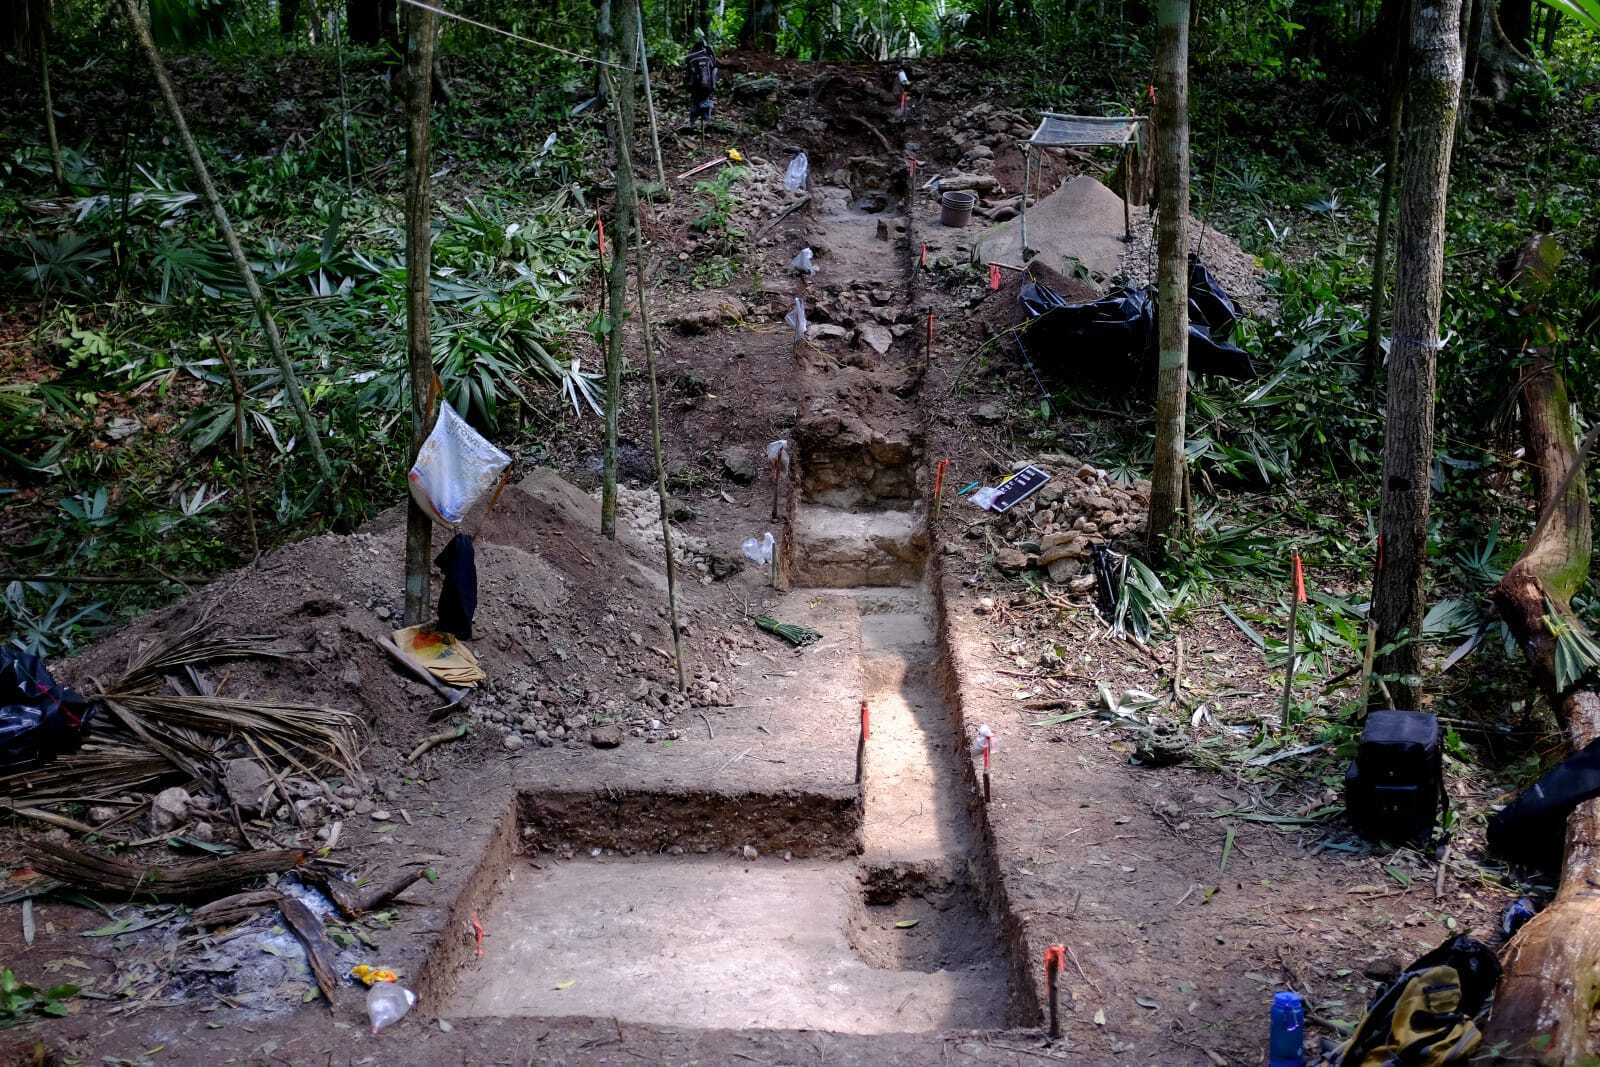 Ancient Mayan city discovered in the jungle of Guatemala (photo)